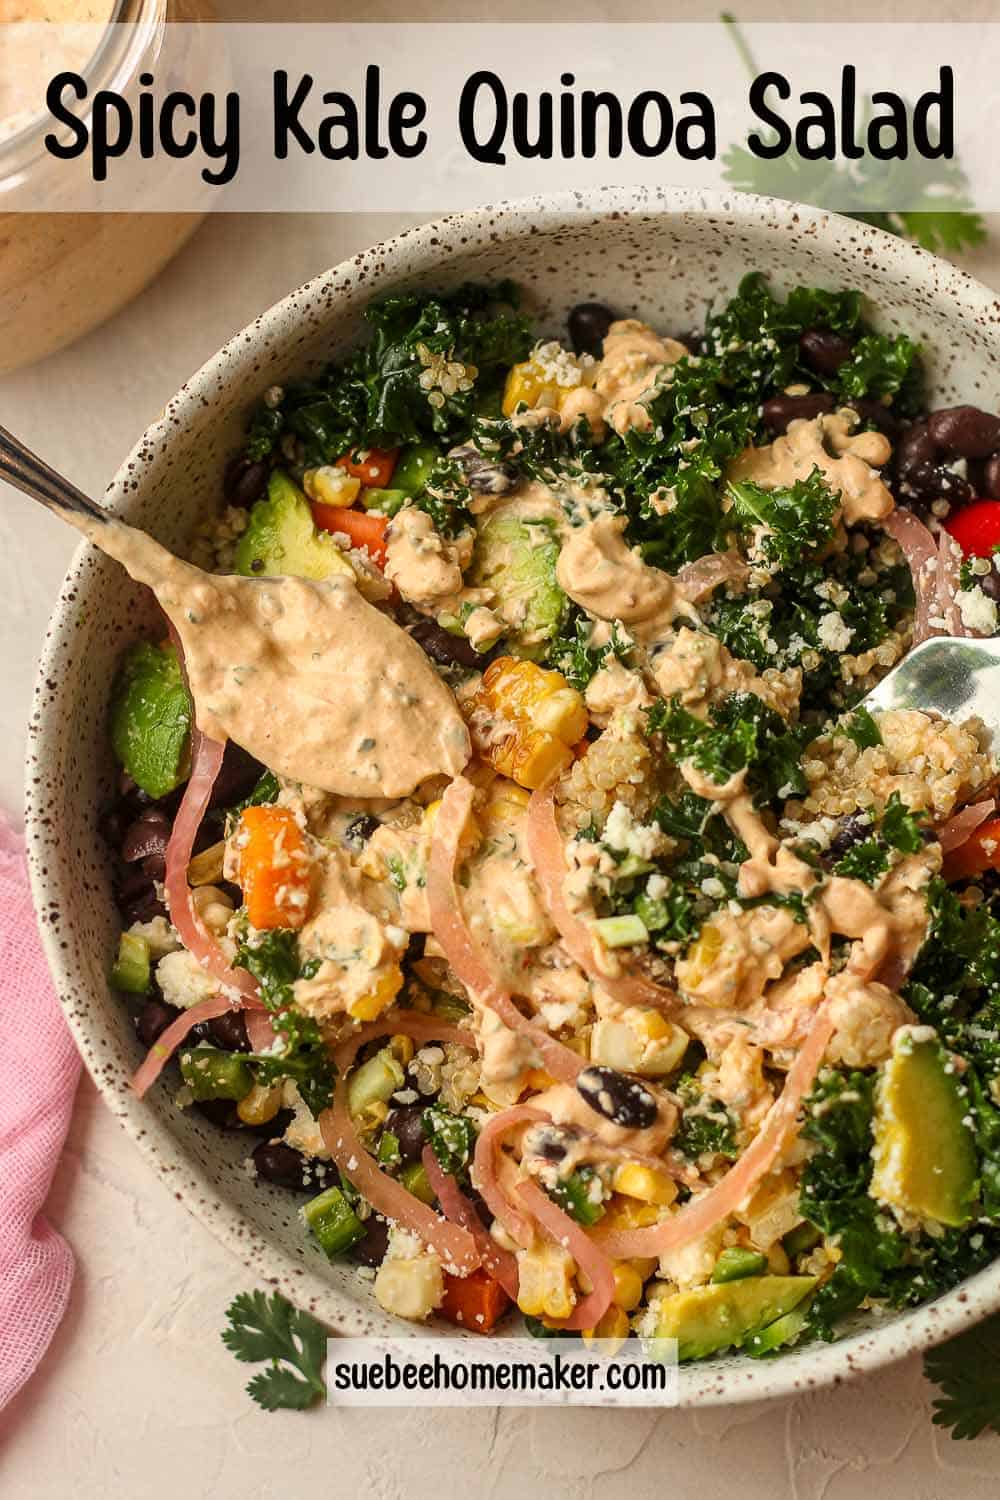 A bowl of spicy kale quinoa salad with a spoonful of dressing.